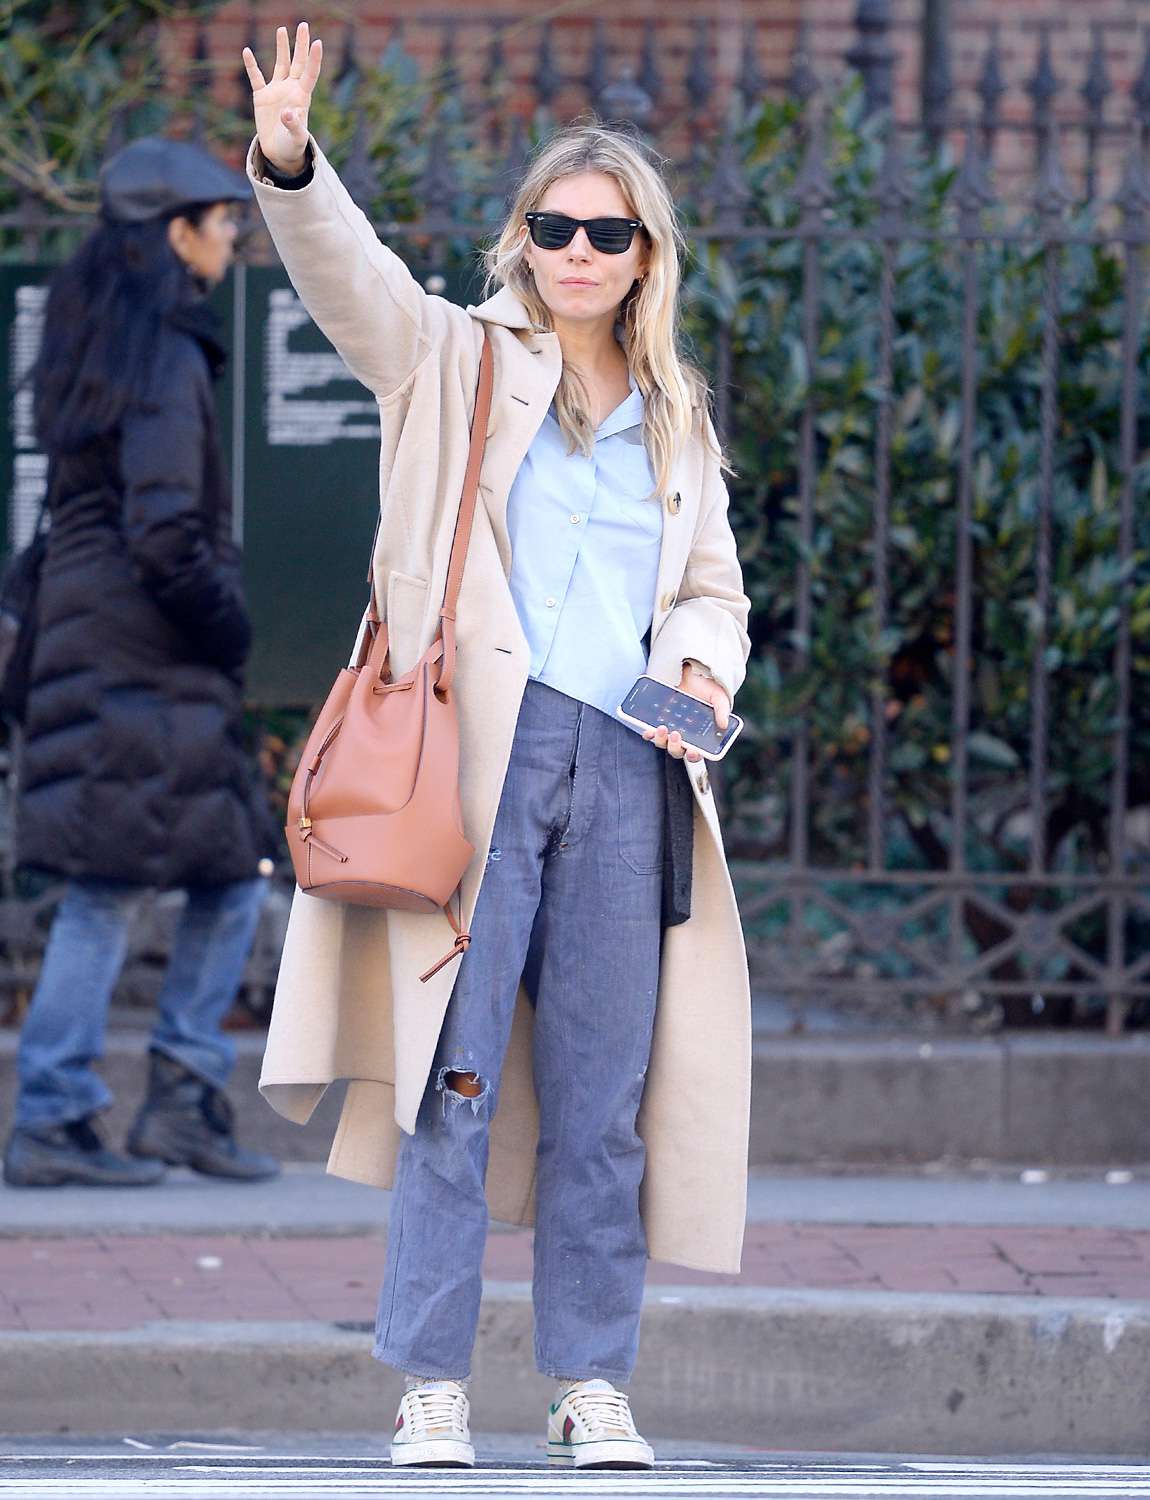 Sienna Miller is pictured on a solo outing in New York City